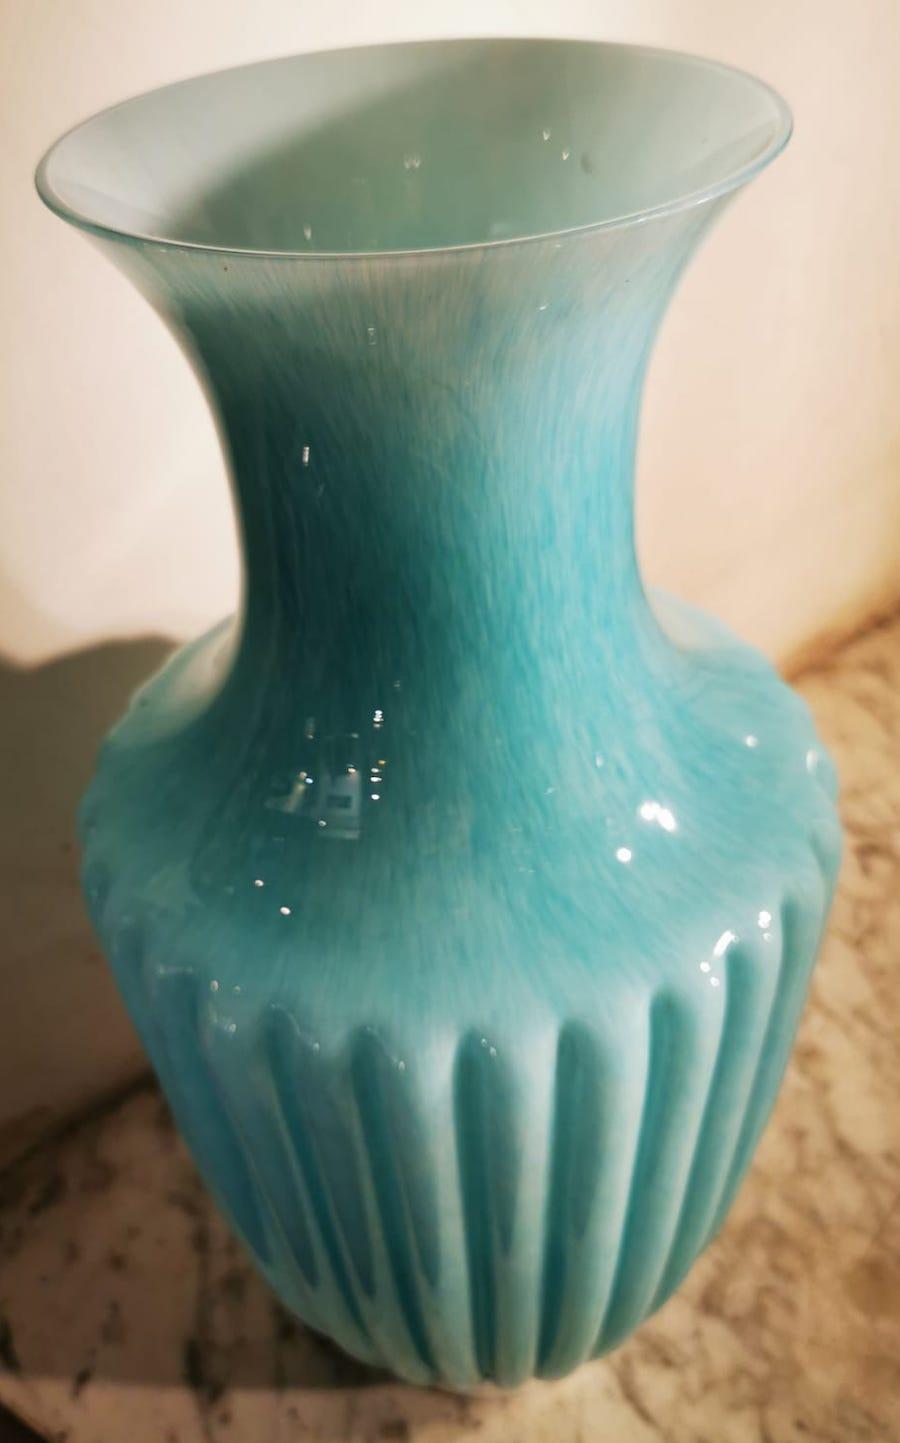 This blue vase realized by Ercole Barovier (1889-1974), original rare Murano glass vase.

Made in the 1980s, with hot processing inclusions, the famous Venetian brand of Barovier and Toso Murano.

Very good condition.

This object is shipped